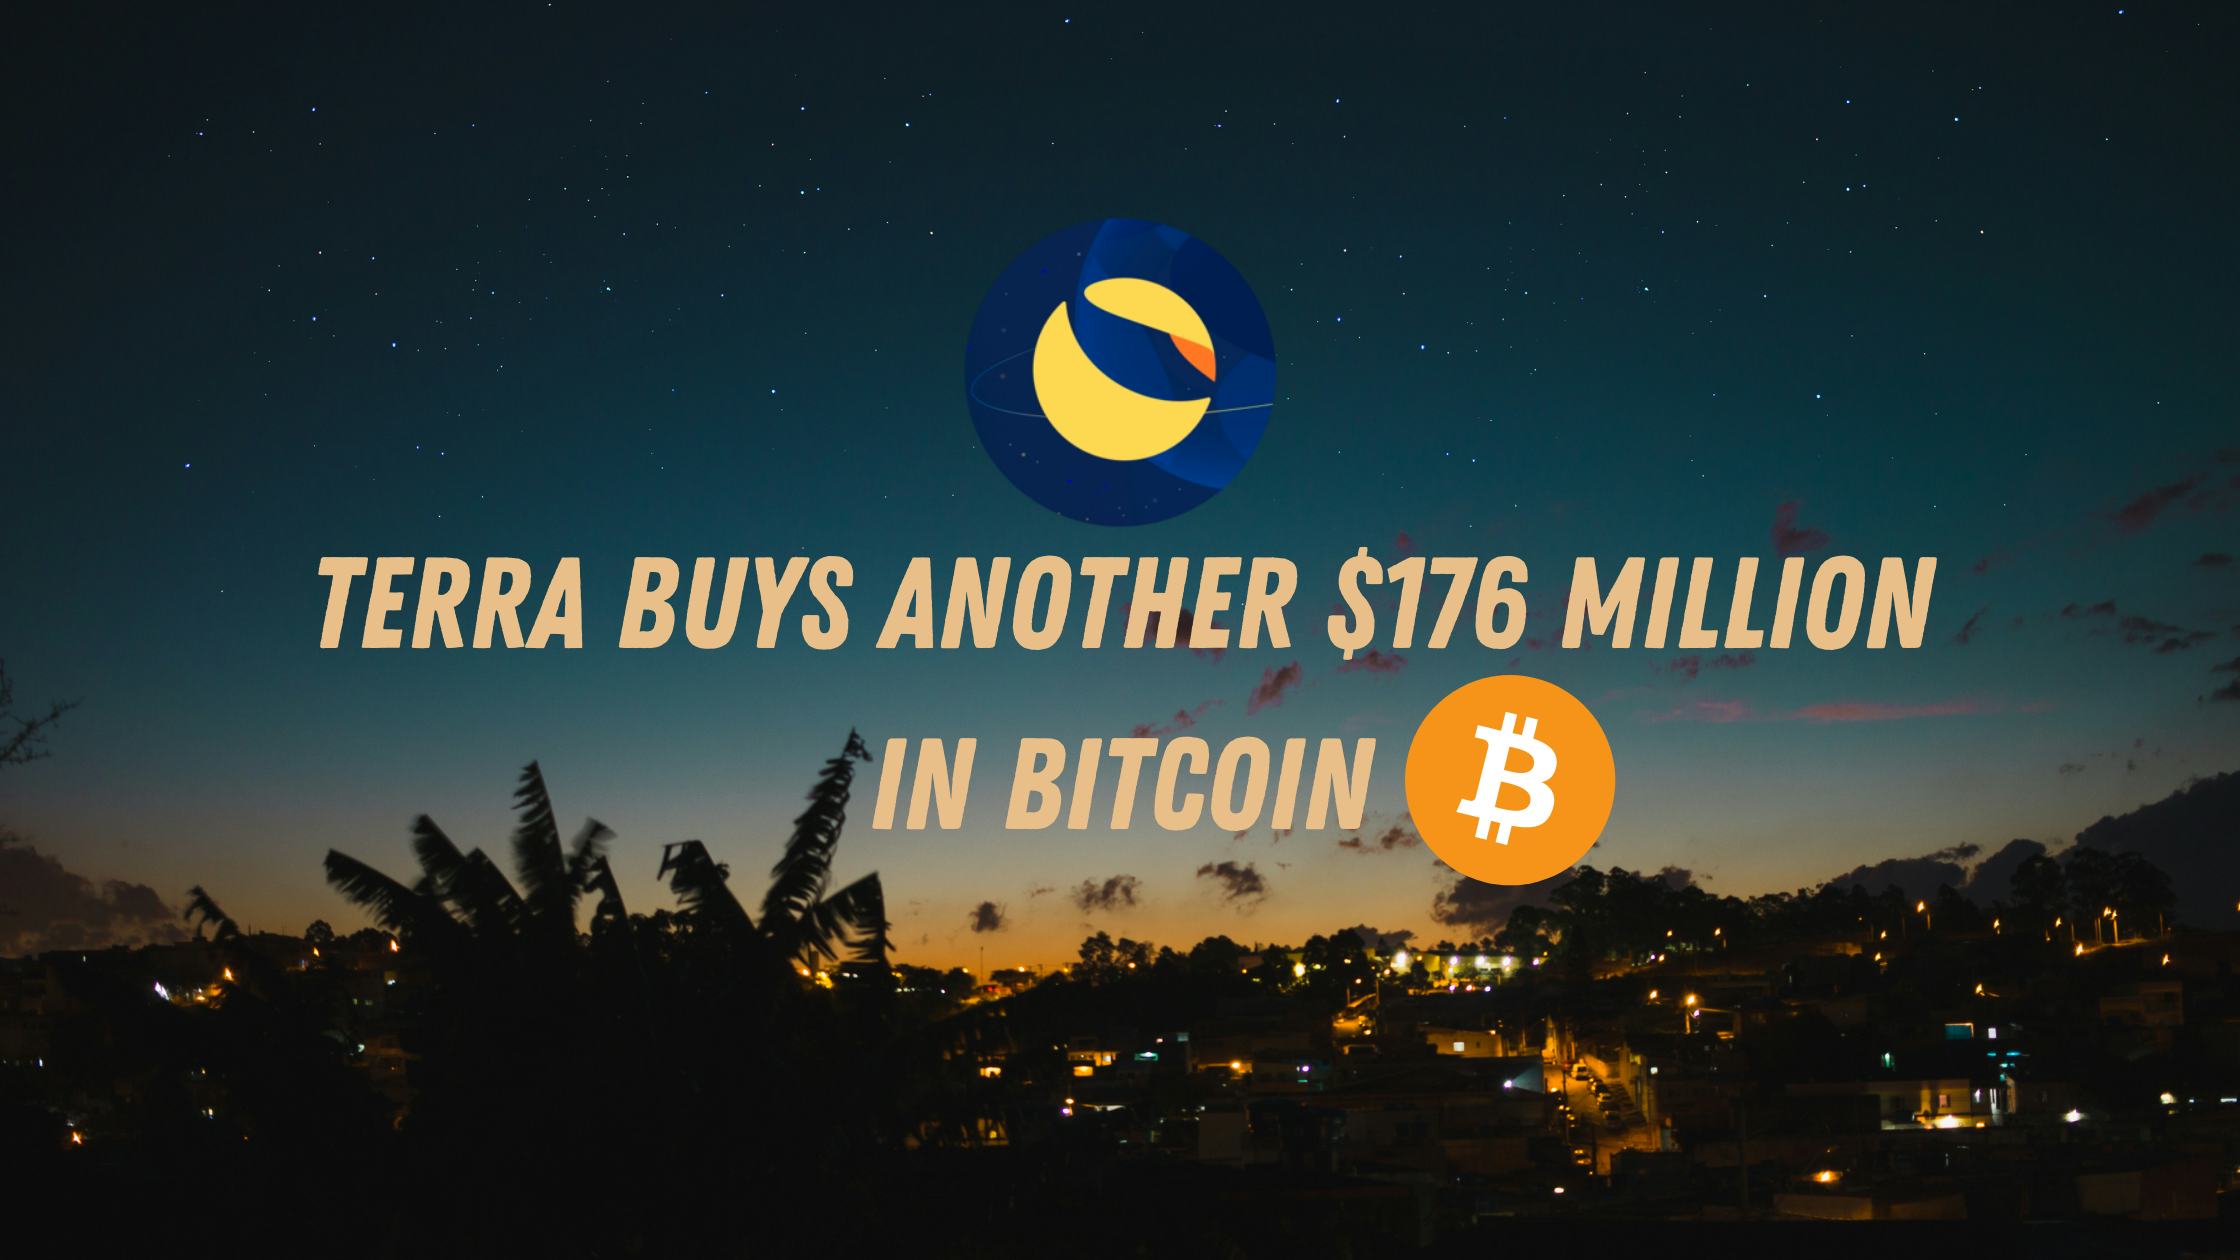 Terra Buys Another $176 Million in Bitcoin